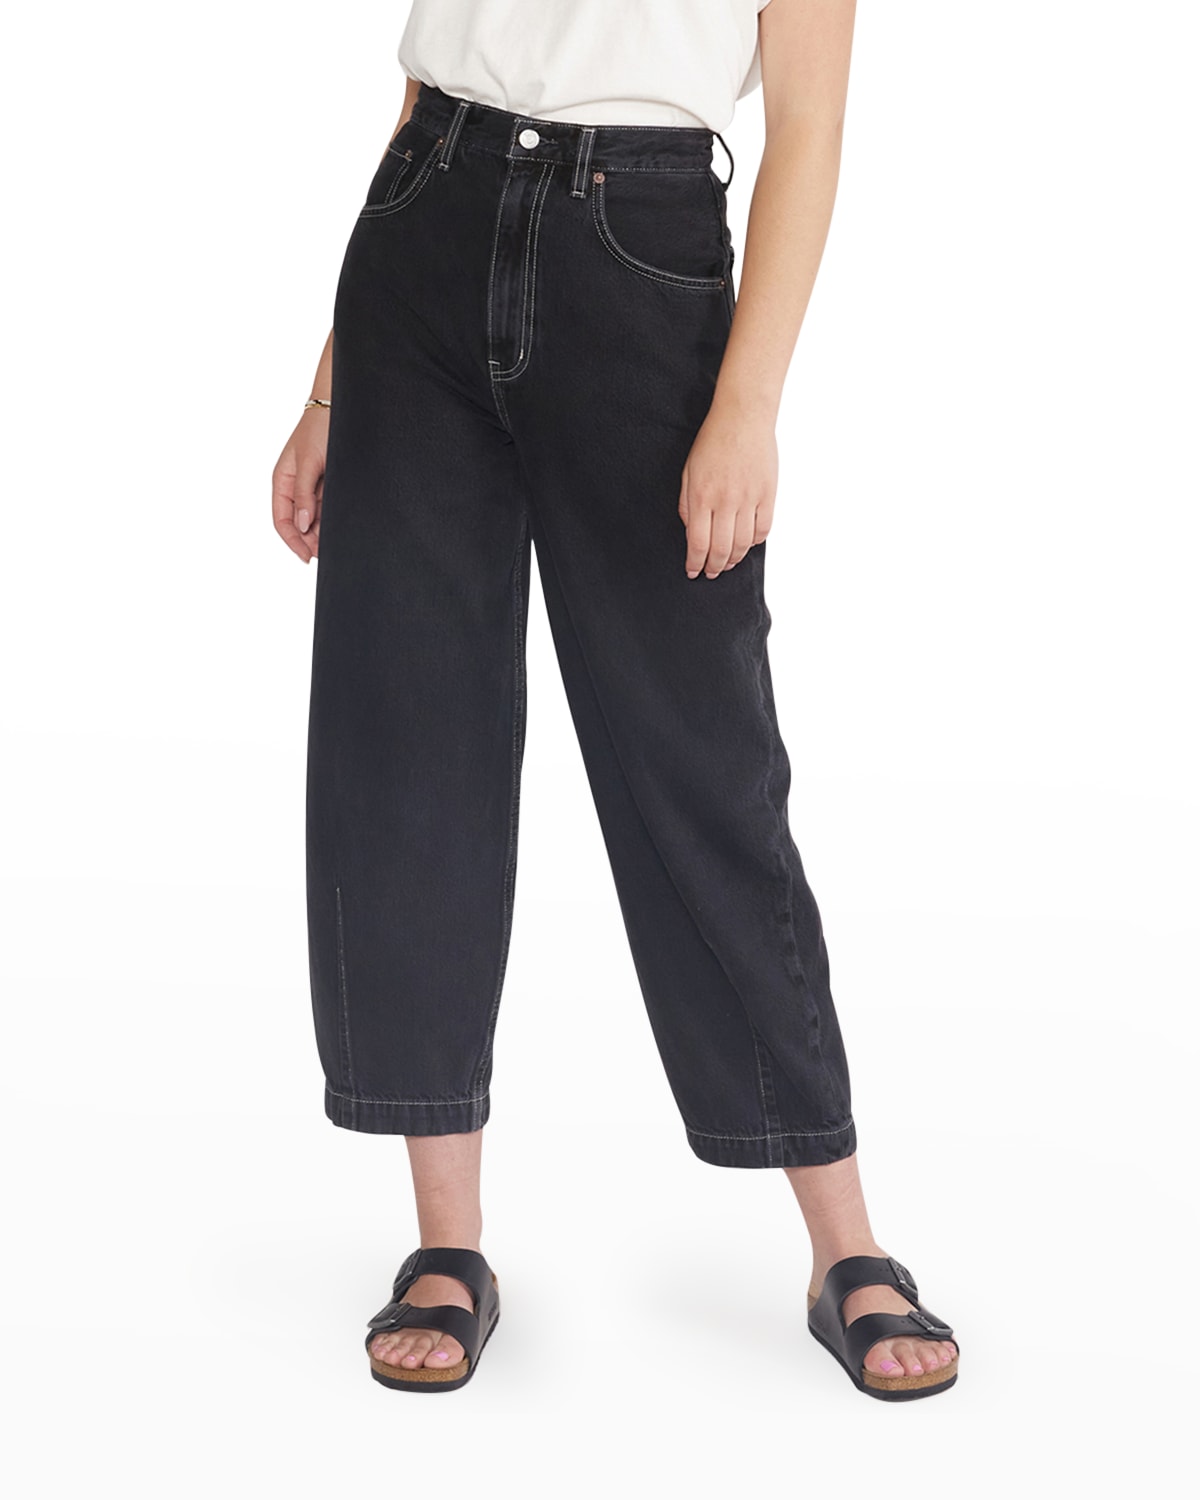 ETICA Iris Cropped Tapered Leg Jeans